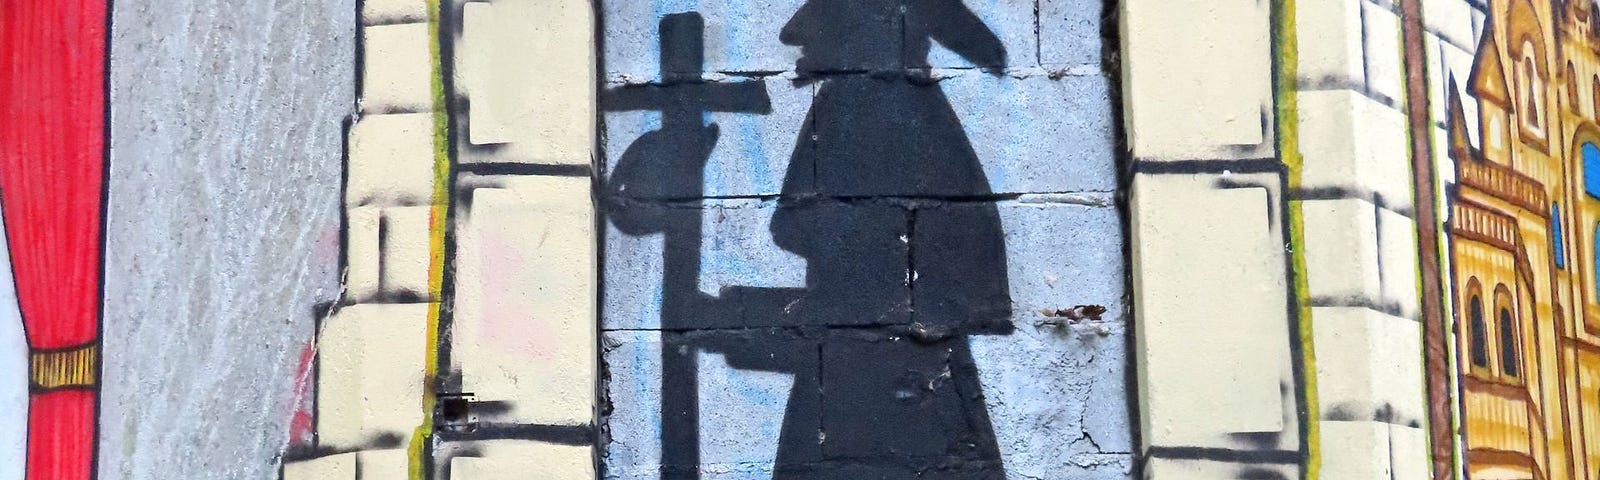 Wall art shows a silhouette of St. James, wearing a long robe and a wide-brimmed hat. He holds a staff with a cross at the top and a small bag that is attached